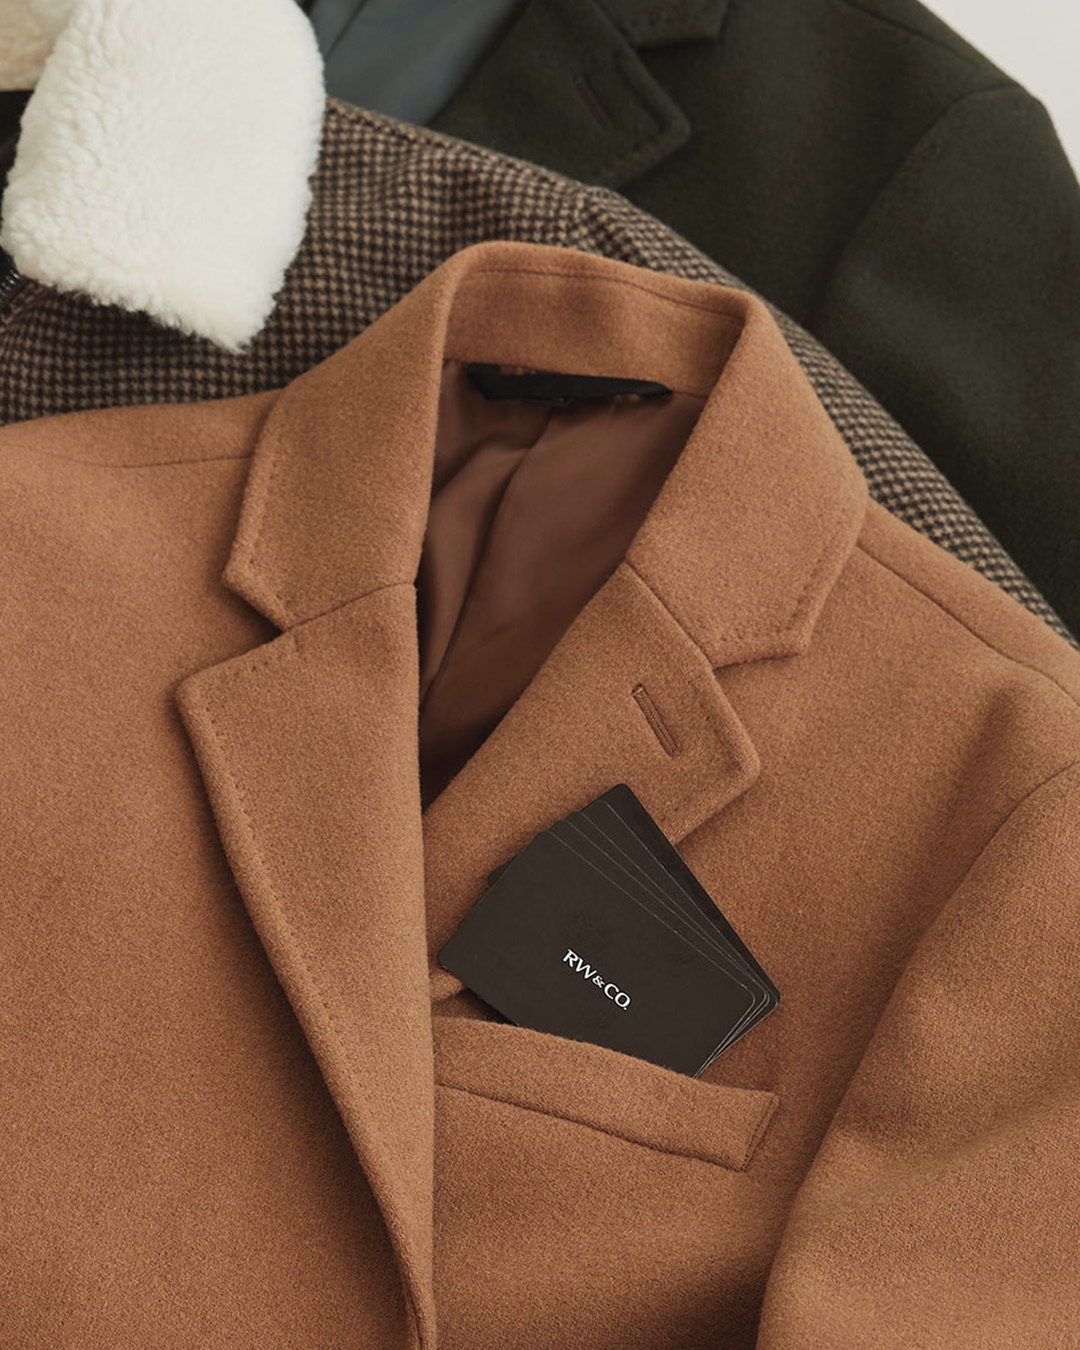 A tan coloured coat from RW&Co. is laid on top of other clothing.